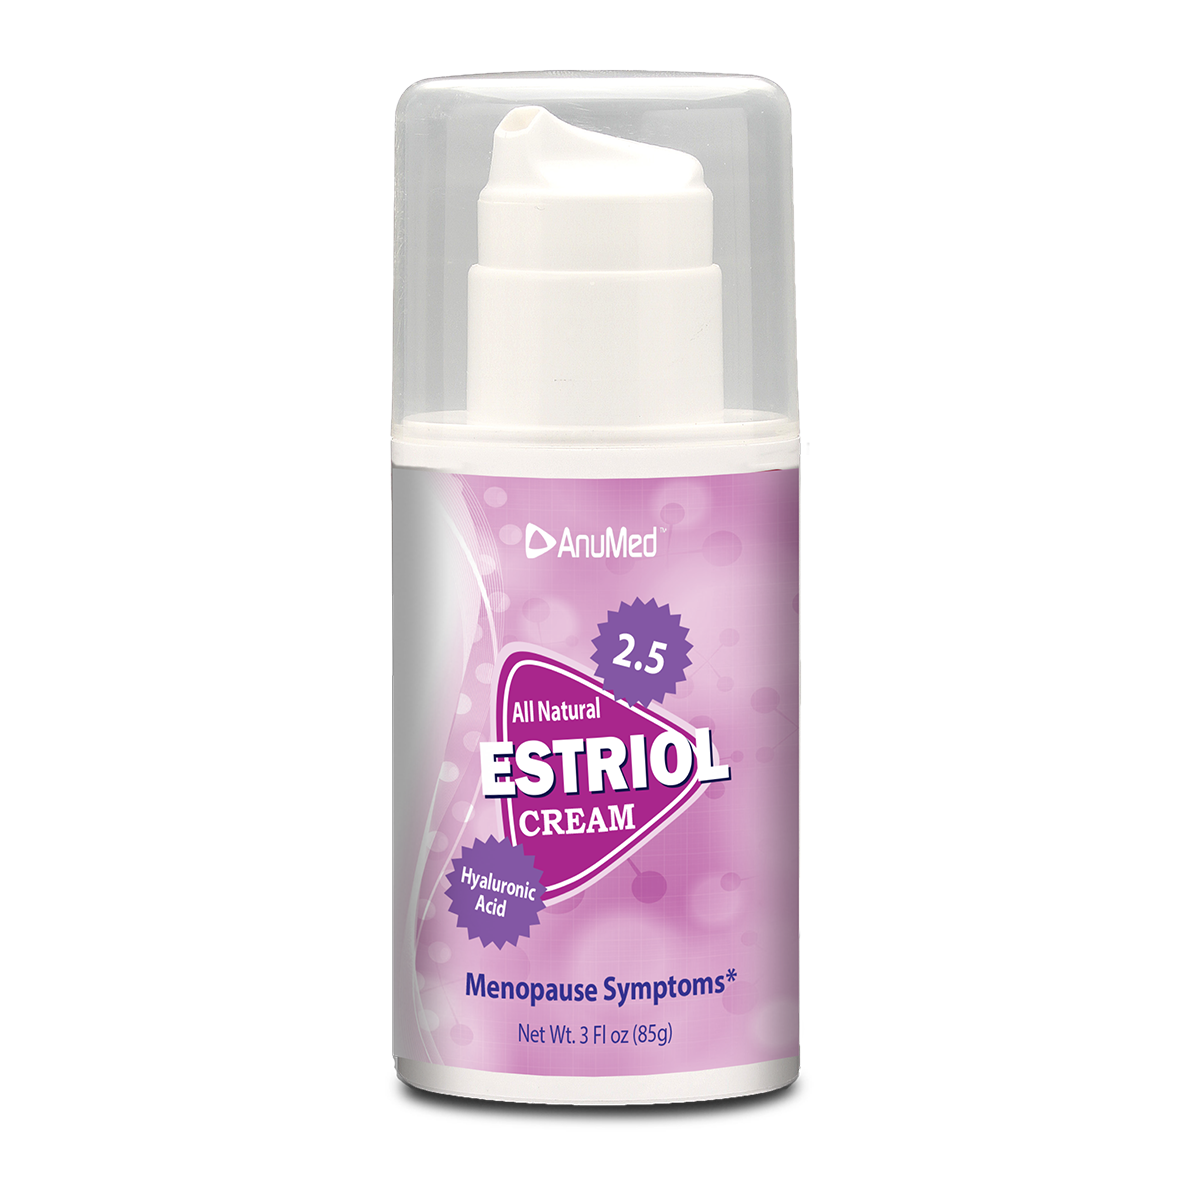 Natural Bioidentical Estriol Cream 2.5 with Hyaluronic Acid + vitamin E for Skin Care During Menopause Relief. Balancing Cream for Women (3oz)